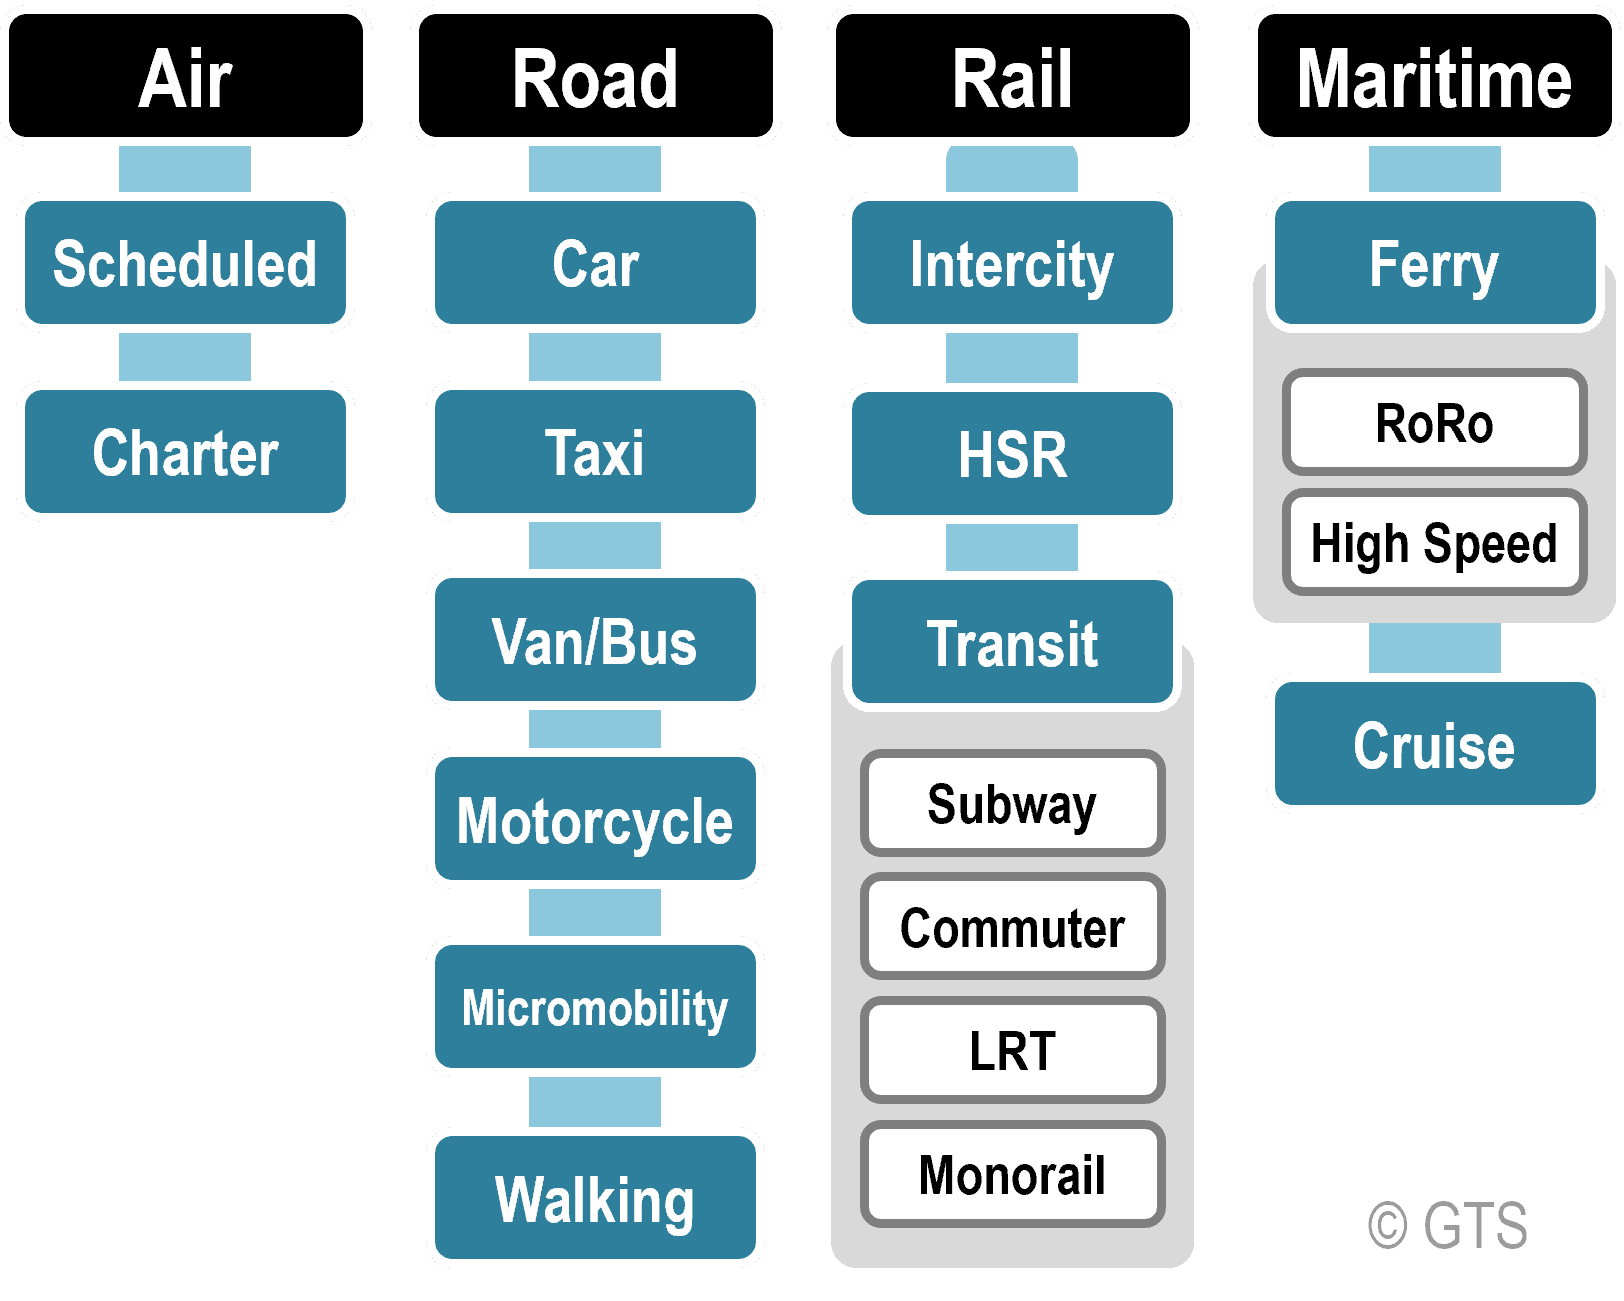 Common Vehicles and Modes of Transportation Vocabulary